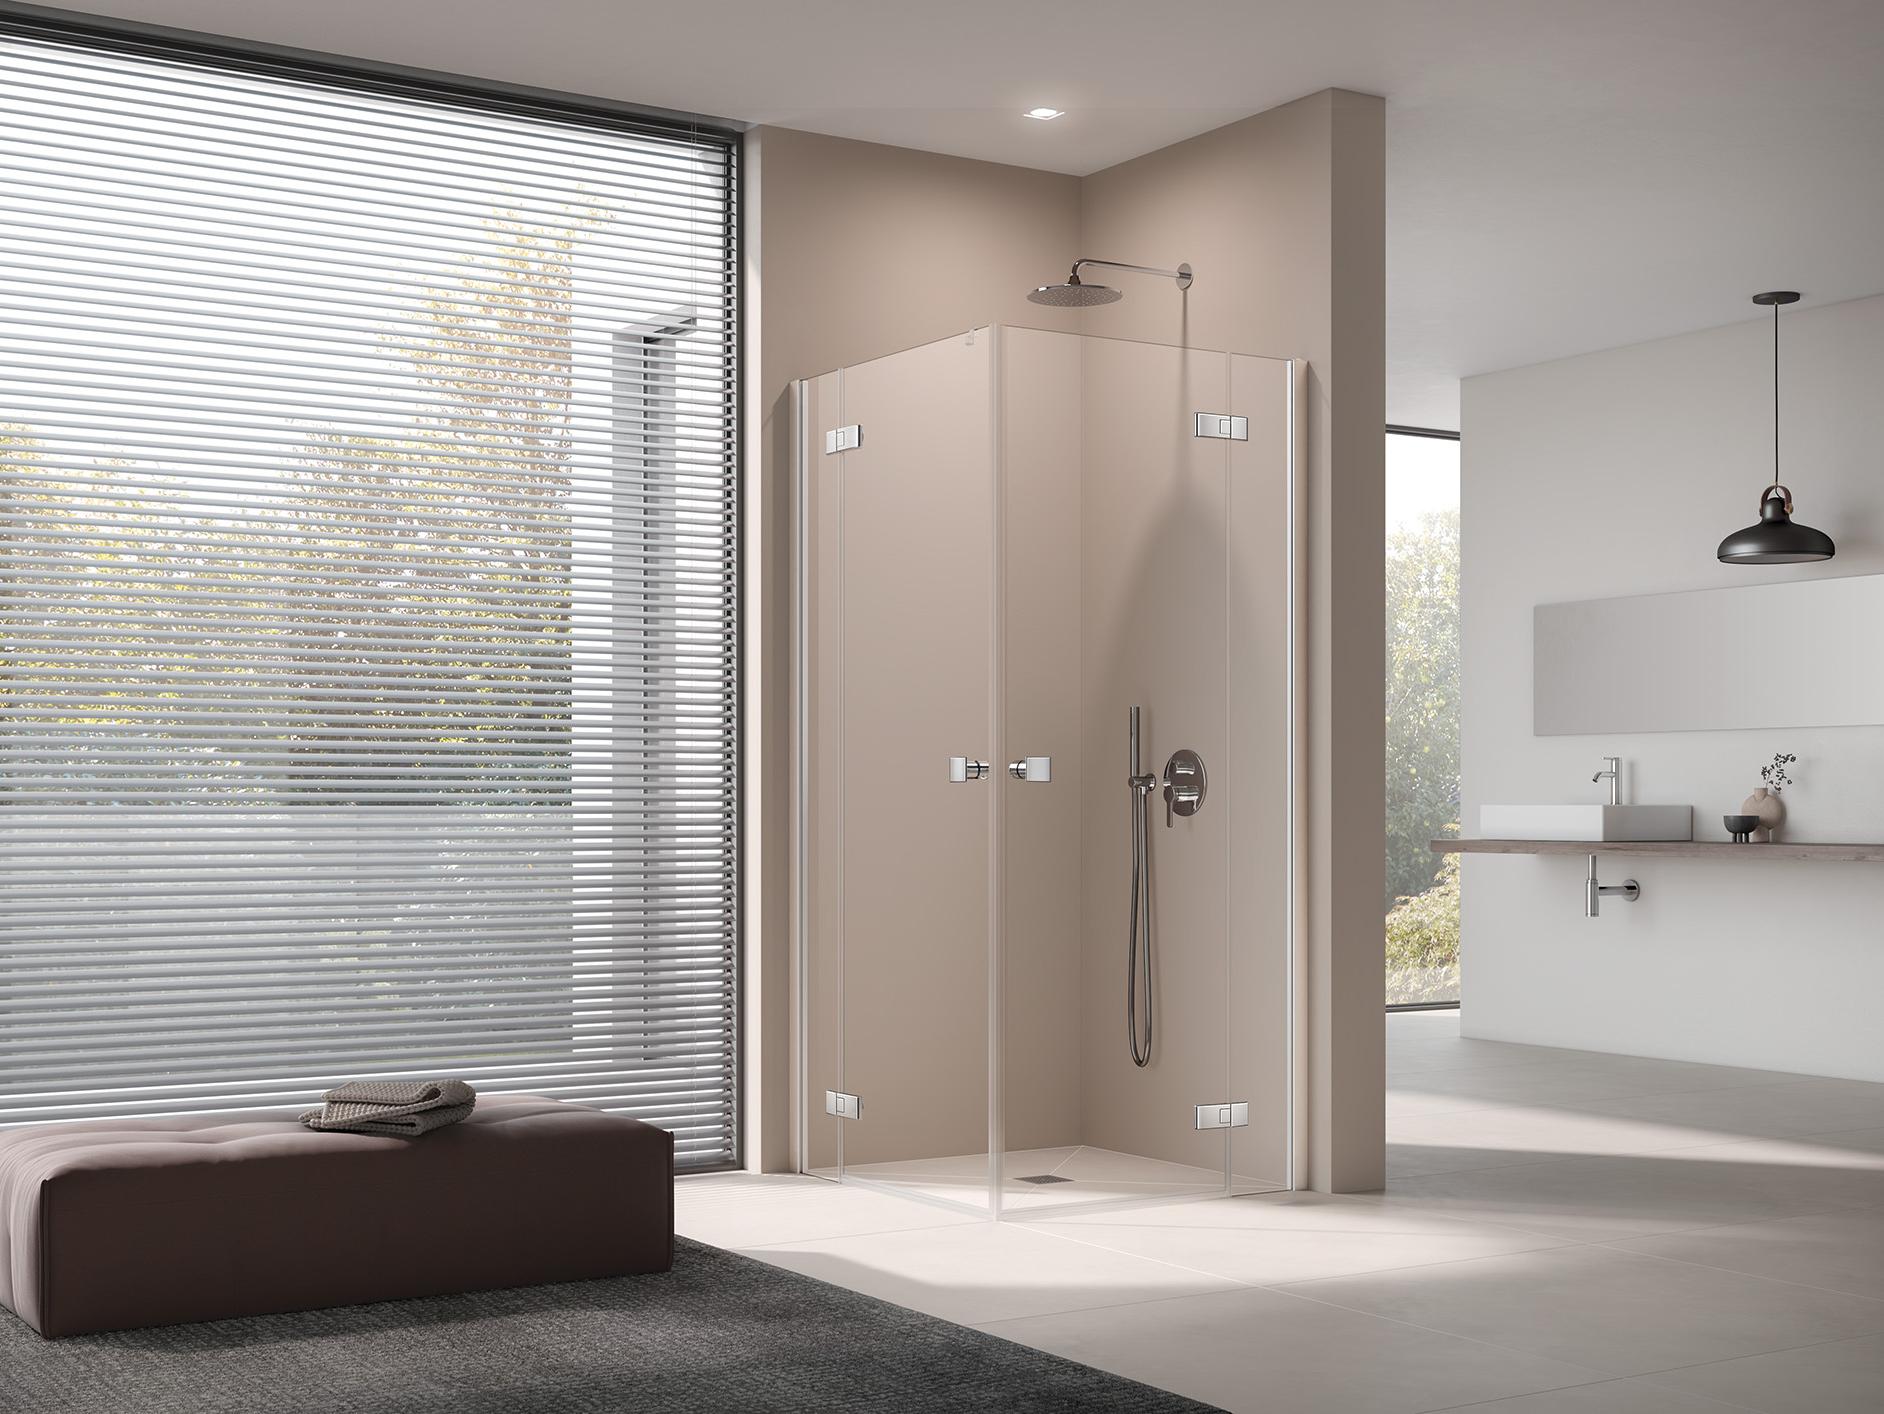 Kermi shower enclosure MENA two-part corner entry (two-part hinged doors with fixed panels) – half part with wall profile